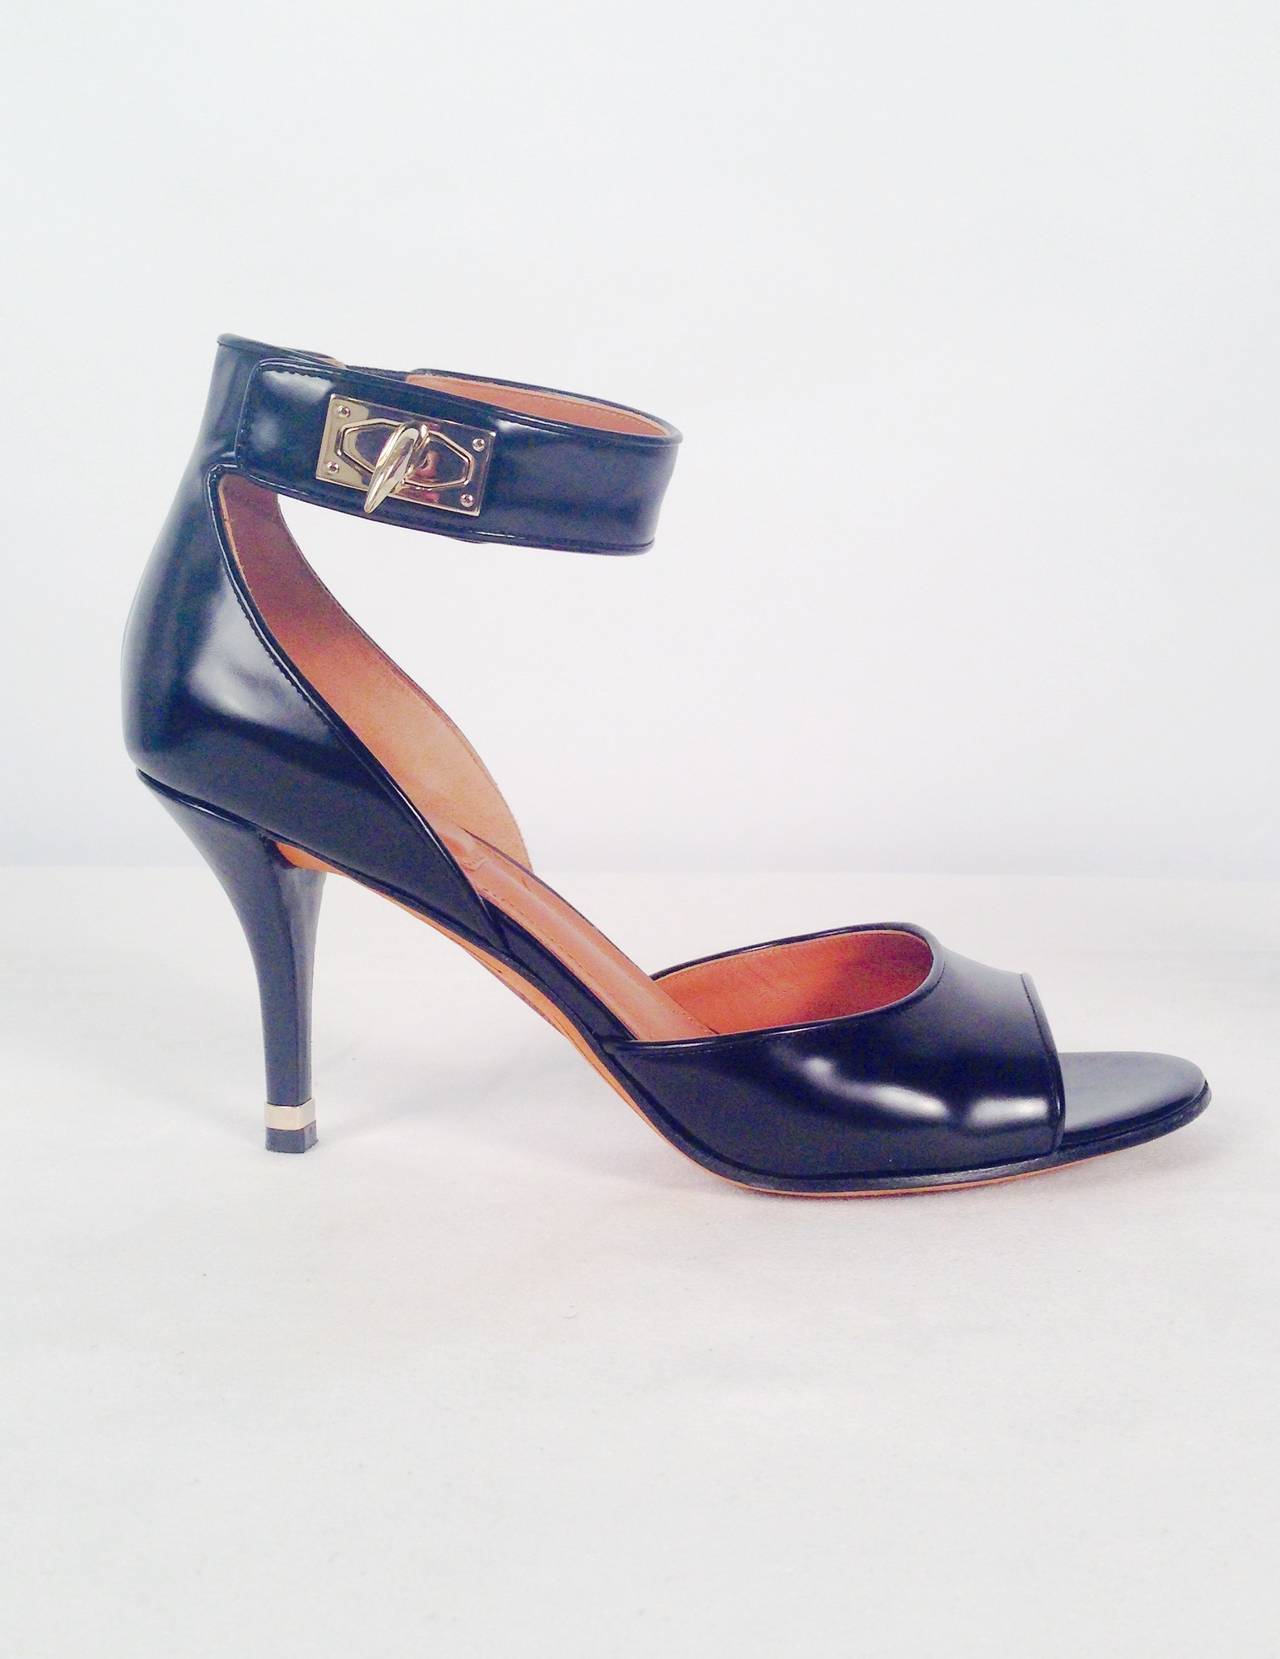 Givenchy Black Polished Calfskin PeepToe Heels With Ankle Straps are worthy of the runway in any fashion capital.  Features gold tone heel accent and abstract turn lock on ankle strap.  Classic yet current!  Padded insole ensures comfortable